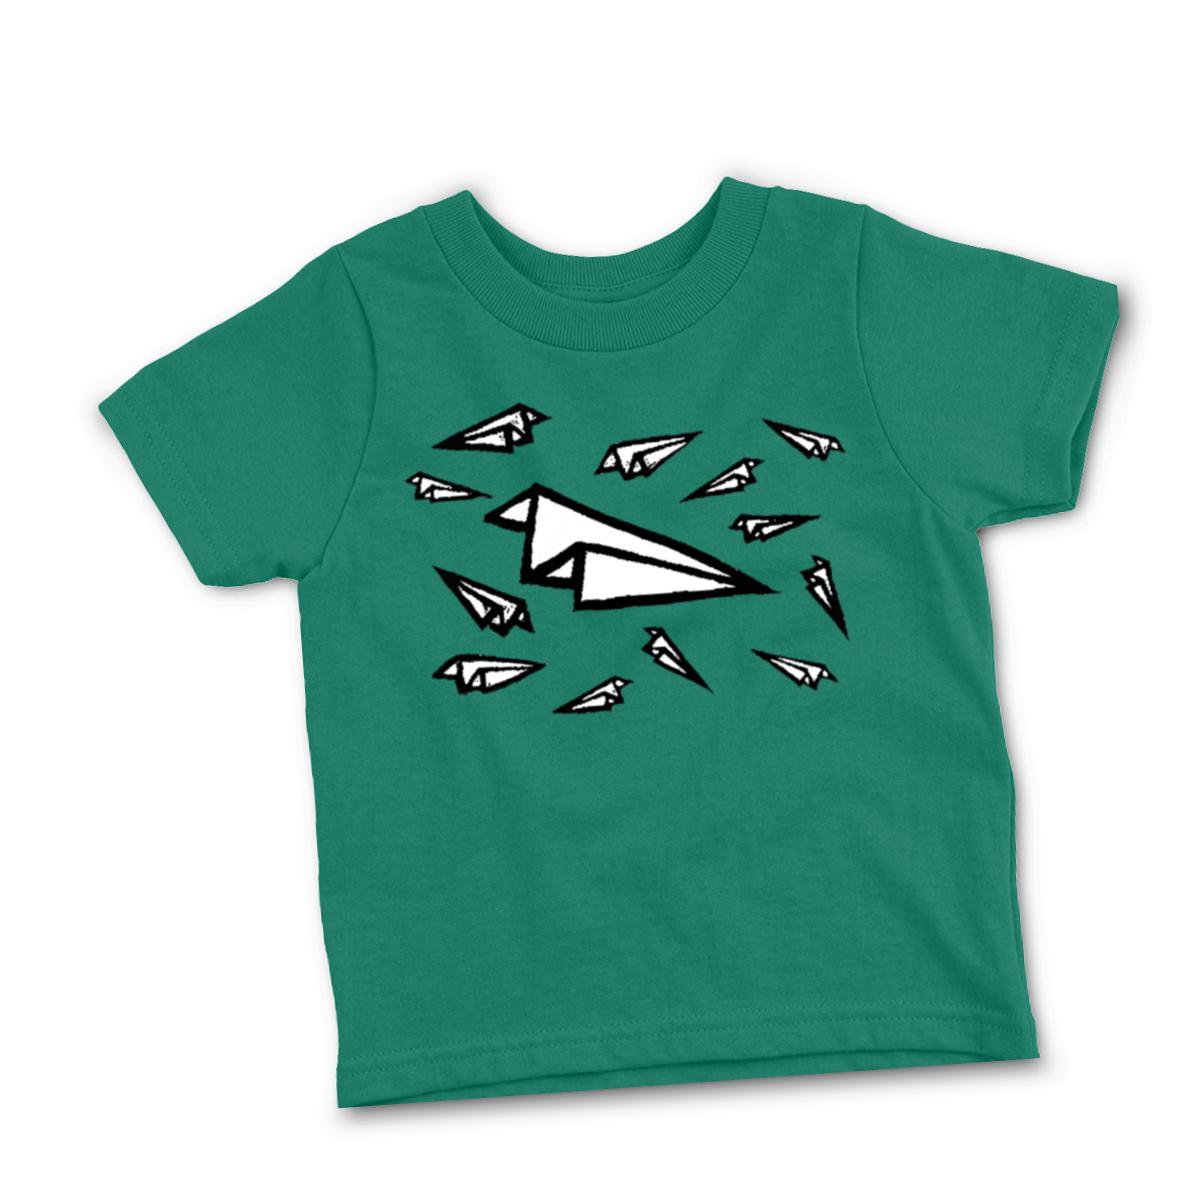 Airplane Frenzy Toddler Tee 56T kelly